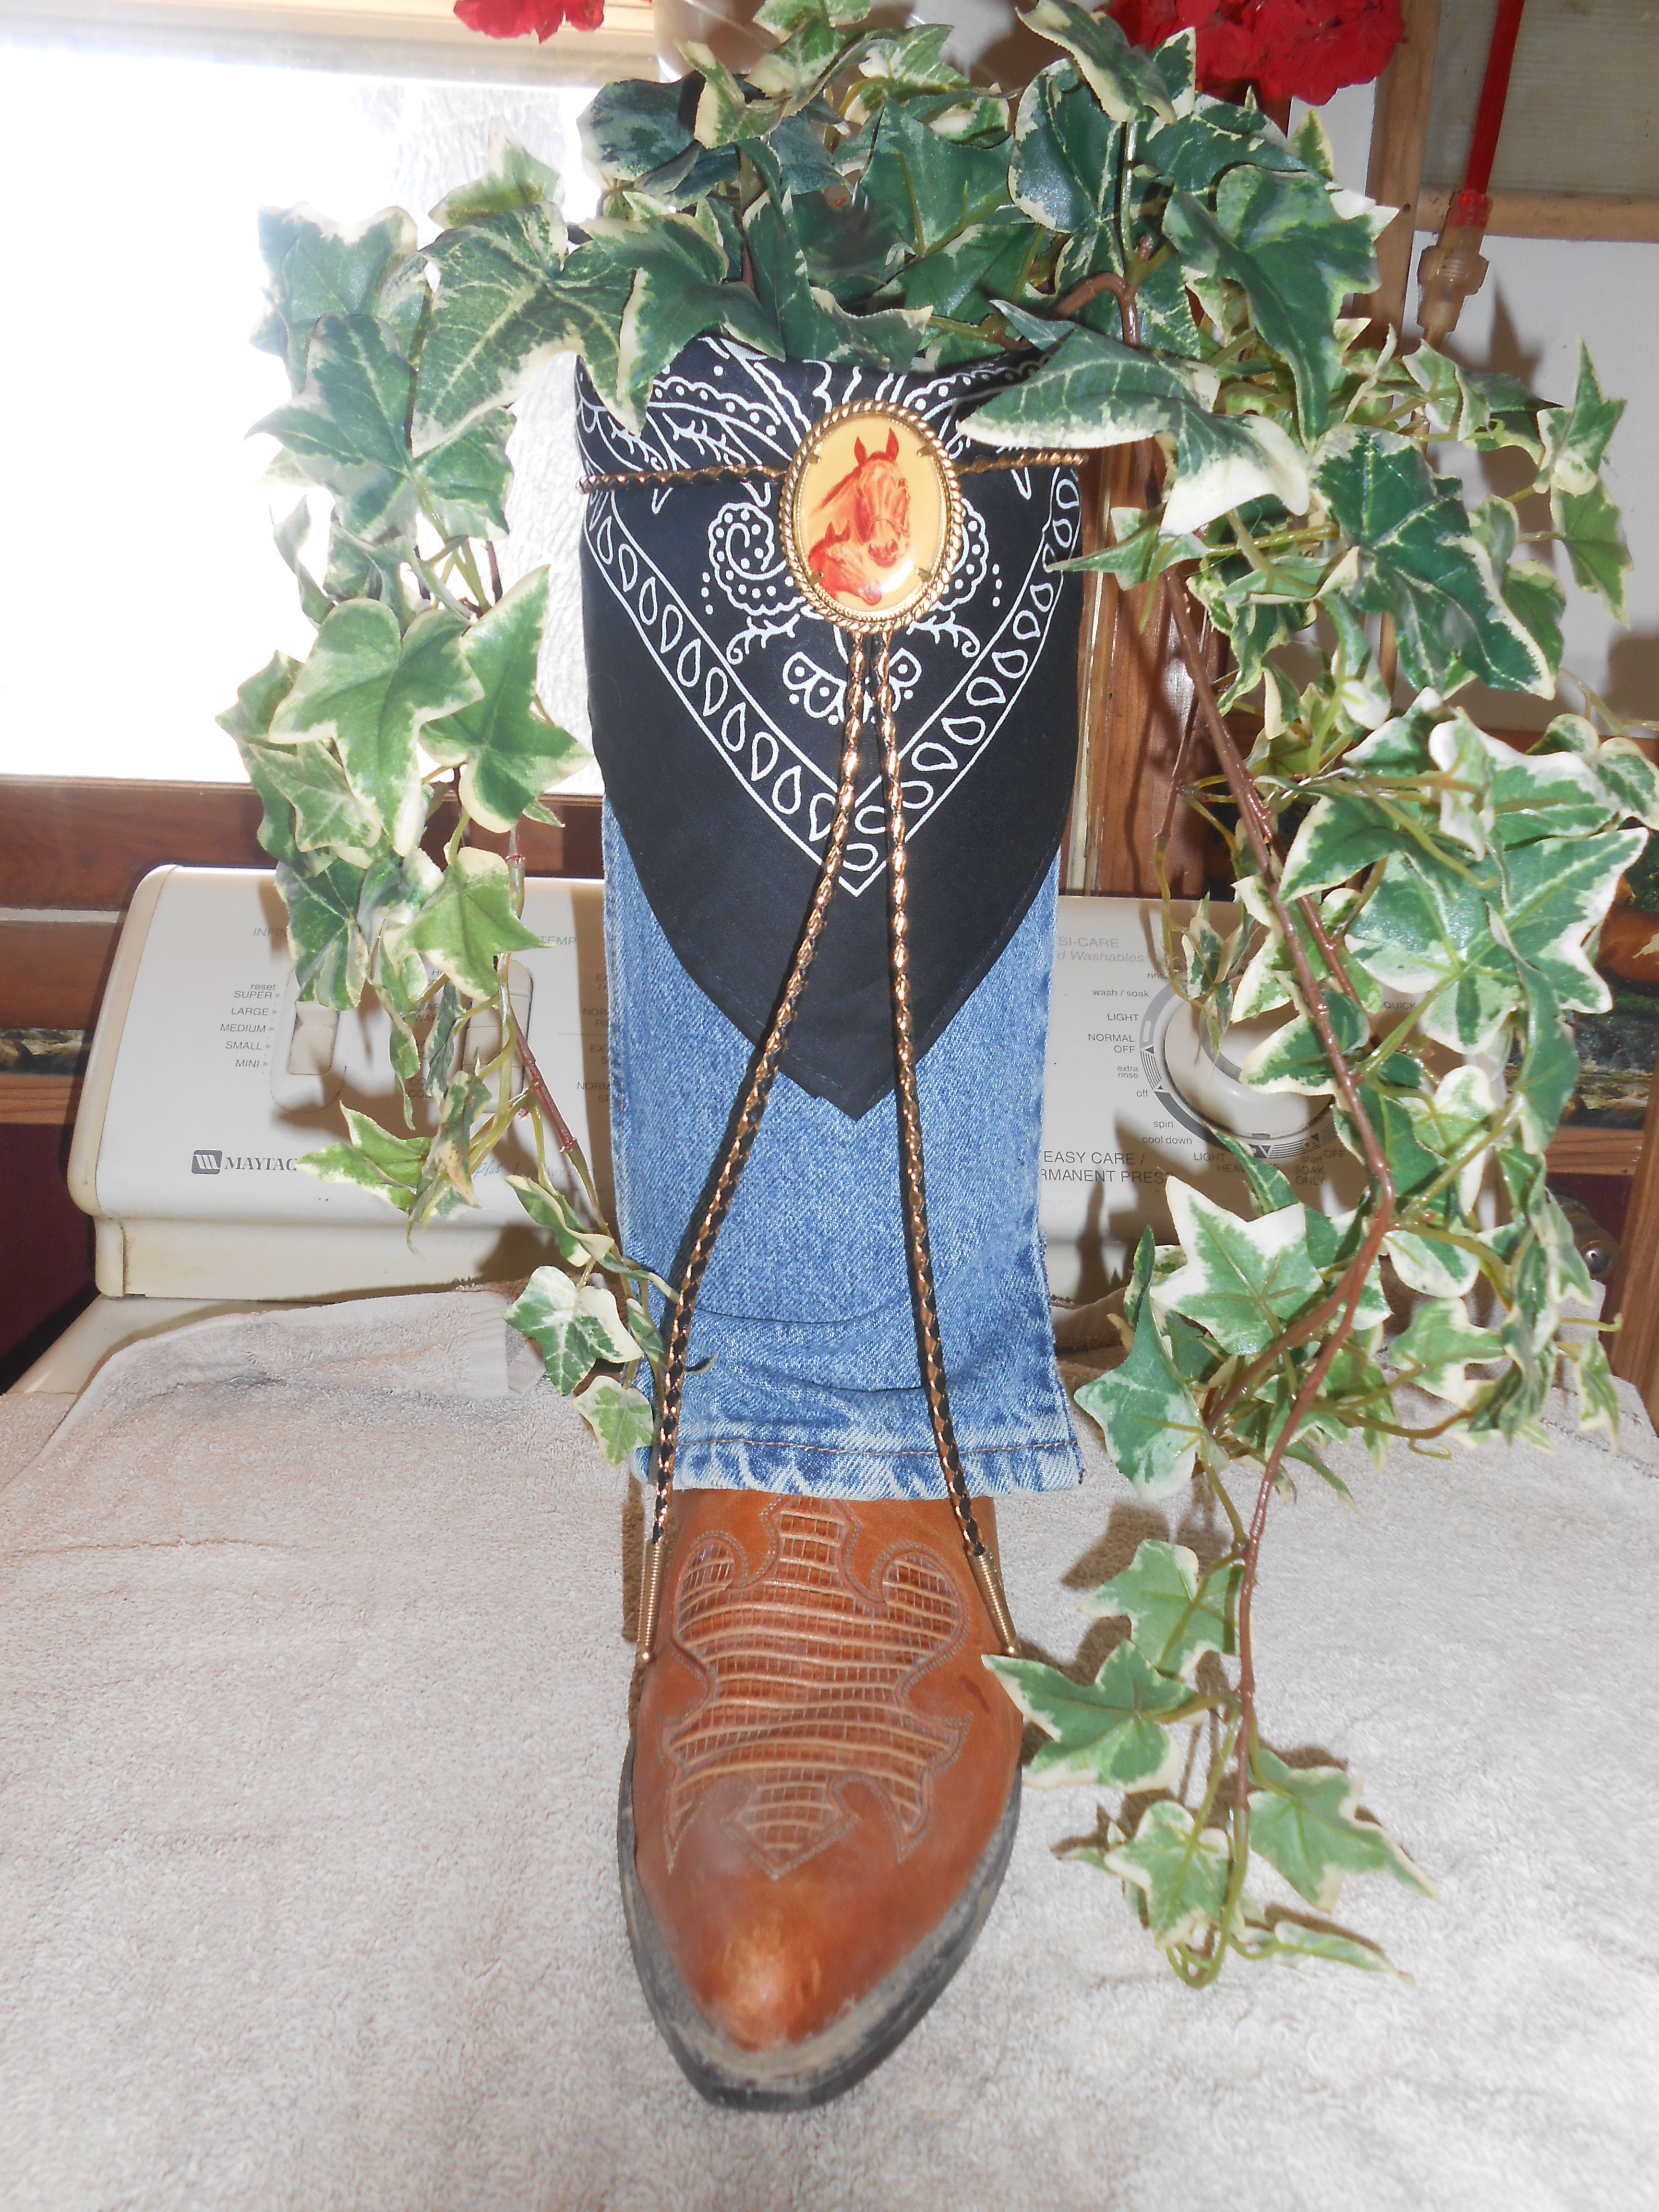 cowboy boot vase wedding decorations of pin by tee woodall on diy pinterest cowboy boots cowboys and within pin by tee woodall on diy pinterest cowboy boots cowboys and planters